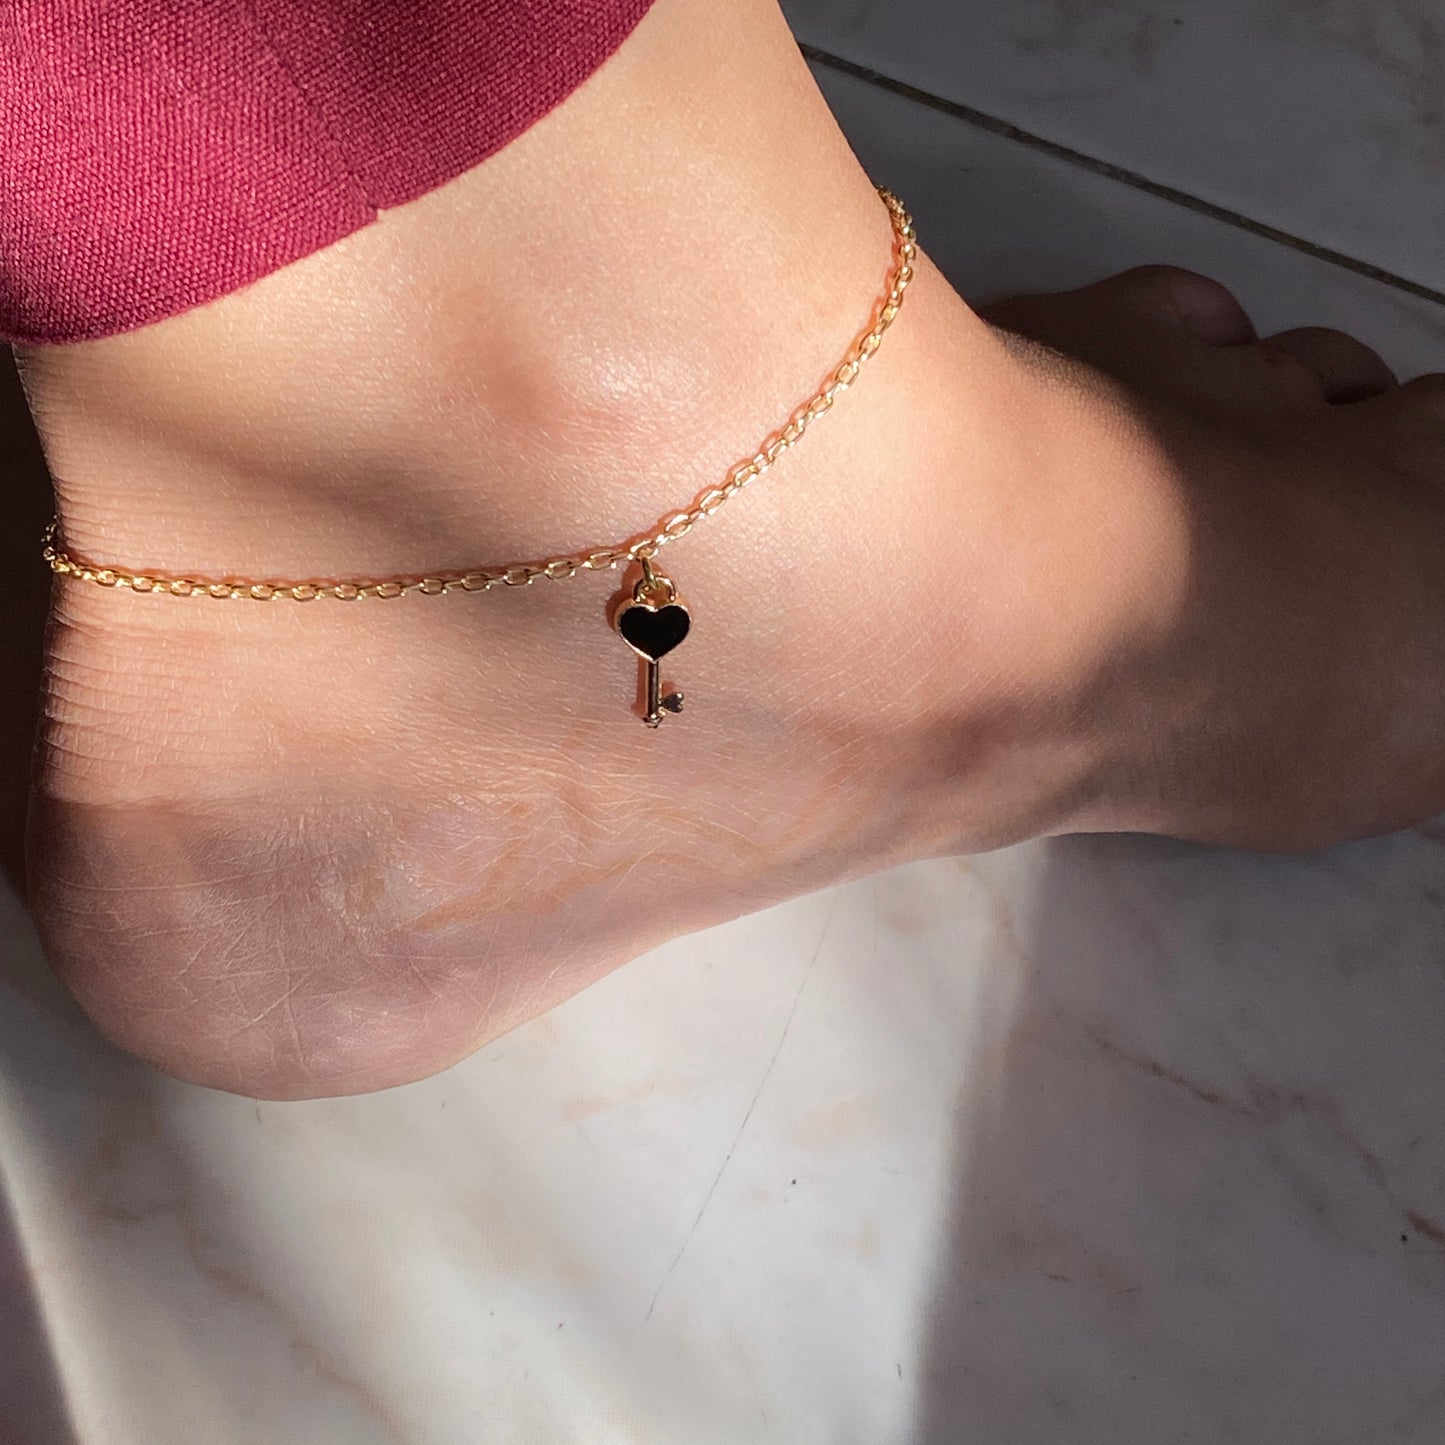 LOCK AND KEY ANKLETS